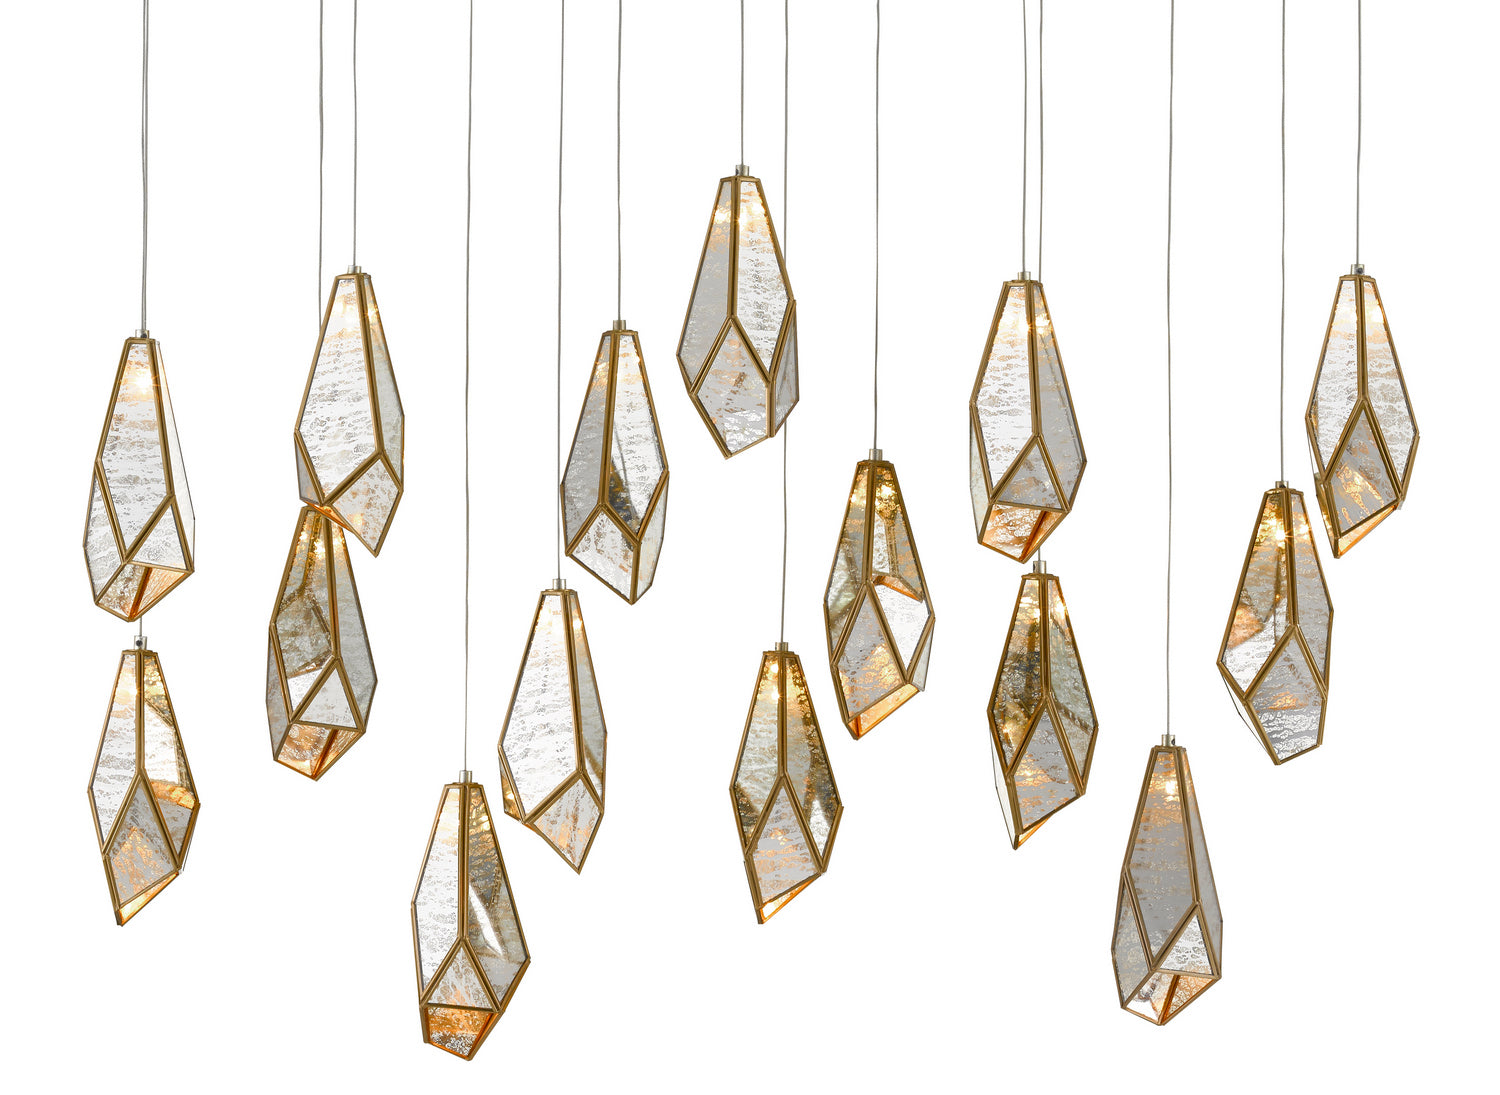 15 Light Pendant from the Glace collection in Painted Silver/Antique Brass finish